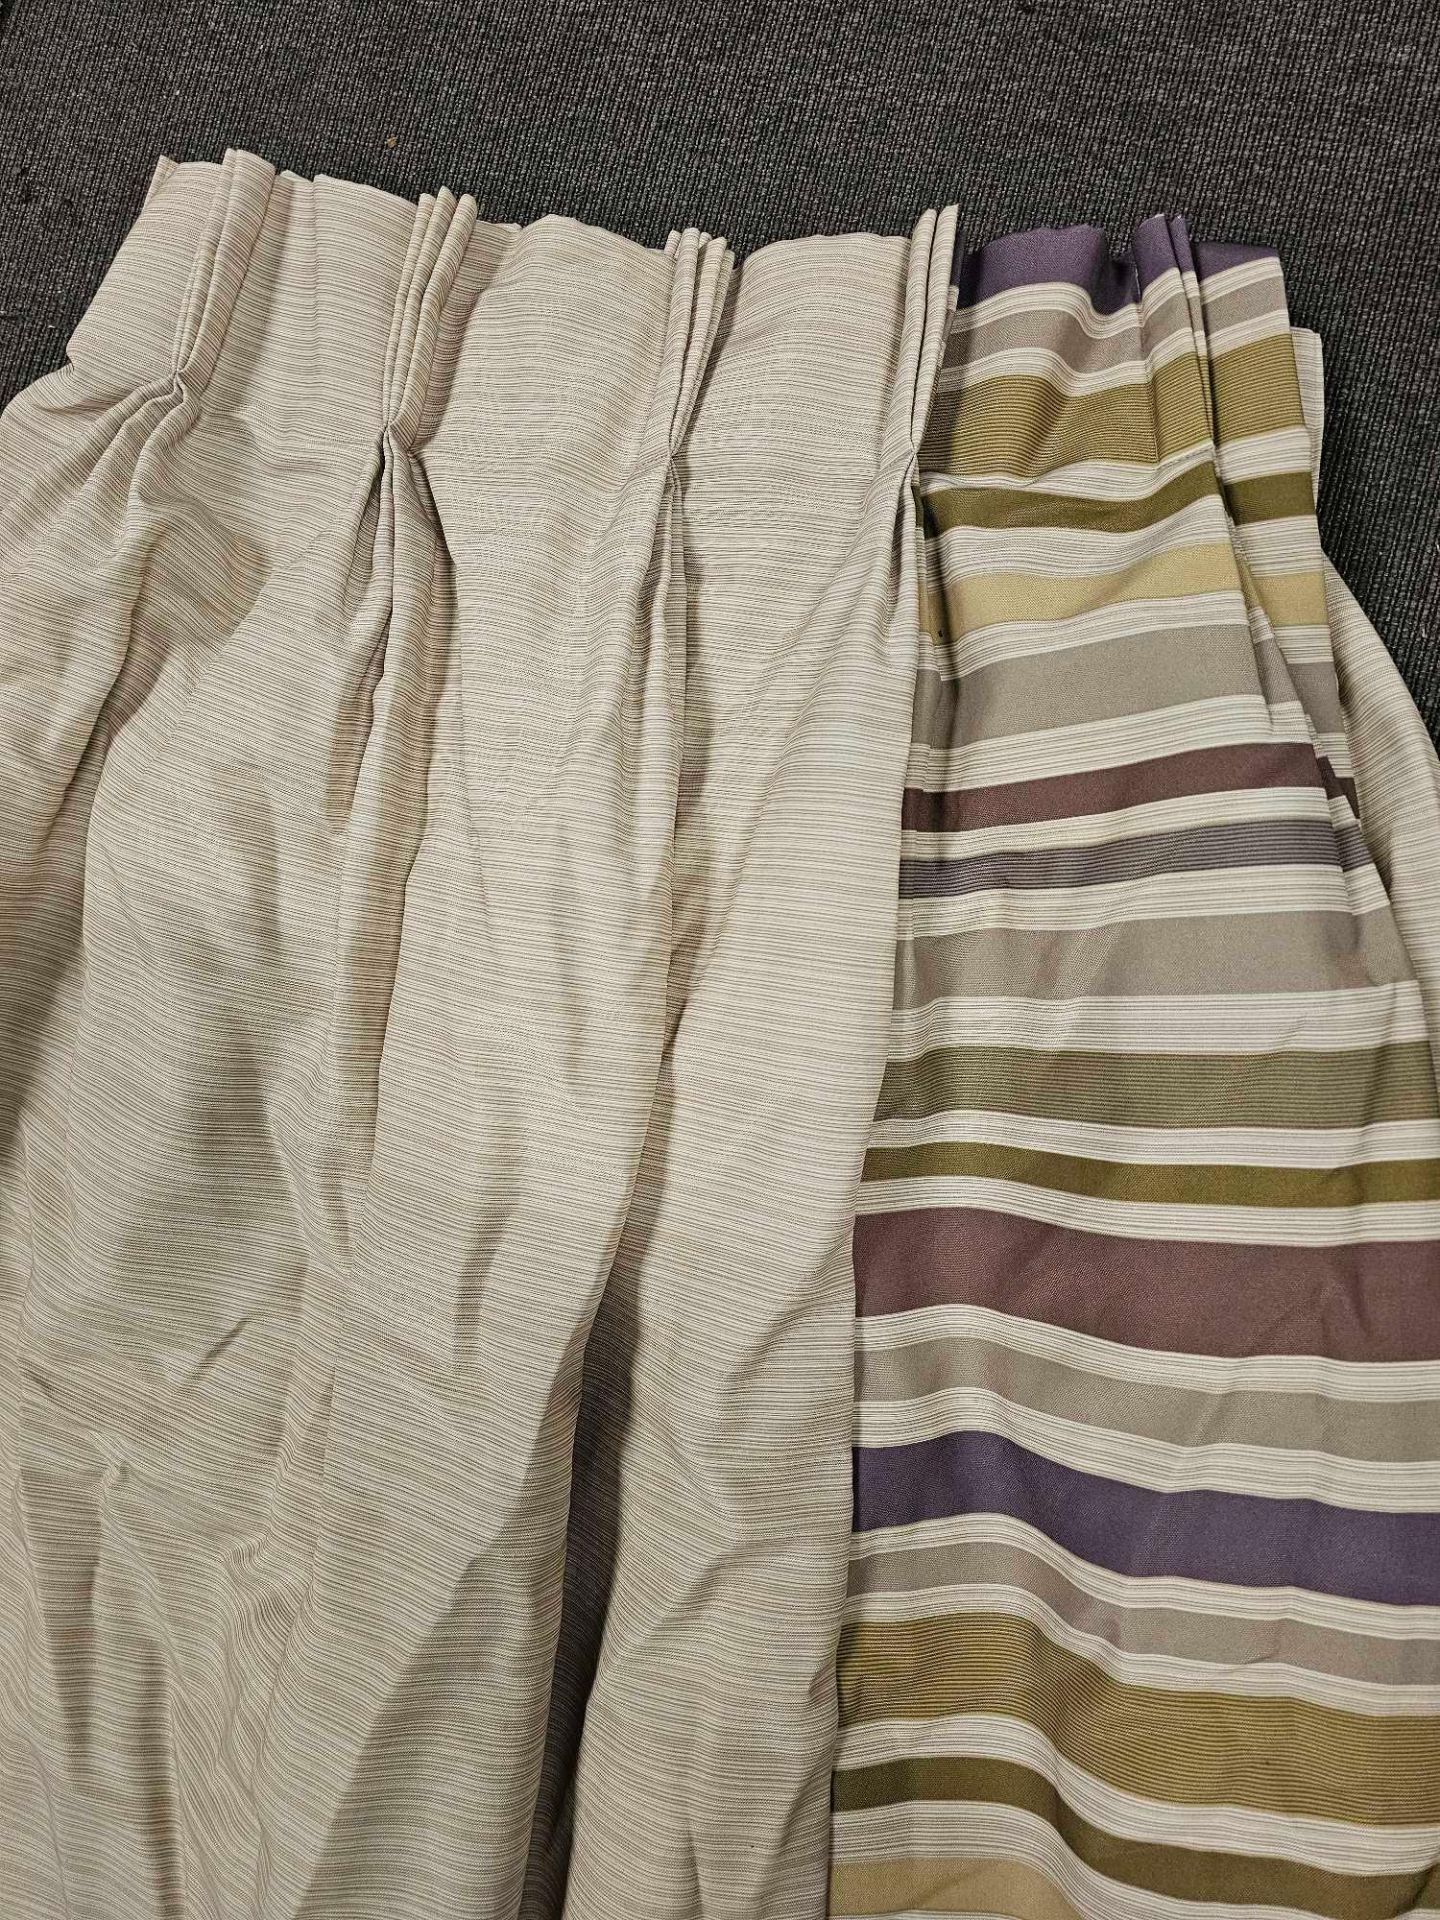 A Pair Of Curtains Striped Edge Purple/Green/Beige/Lime/Brown Size 284 x 250cm ( Ref Red 166) - Image 2 of 2